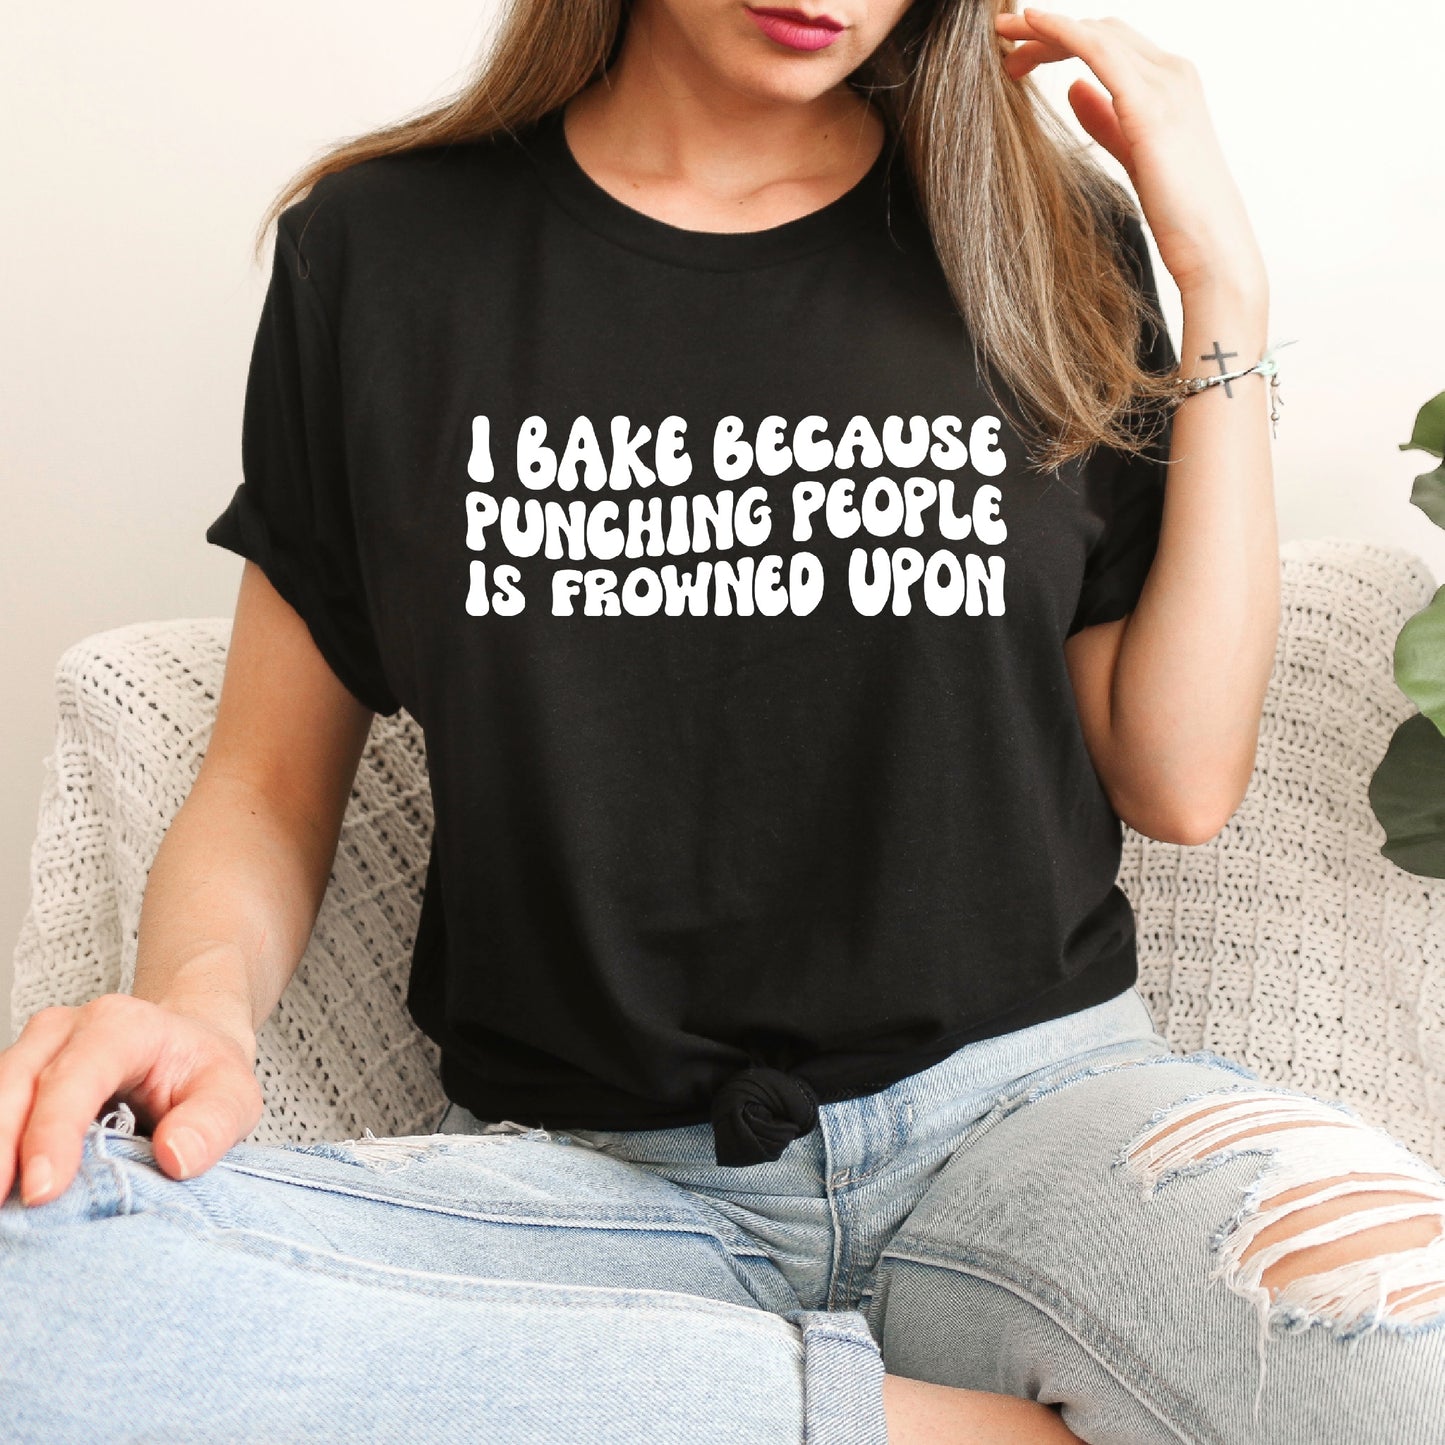 I Bake Because Punching People is Frowned Upon Unisex Tee